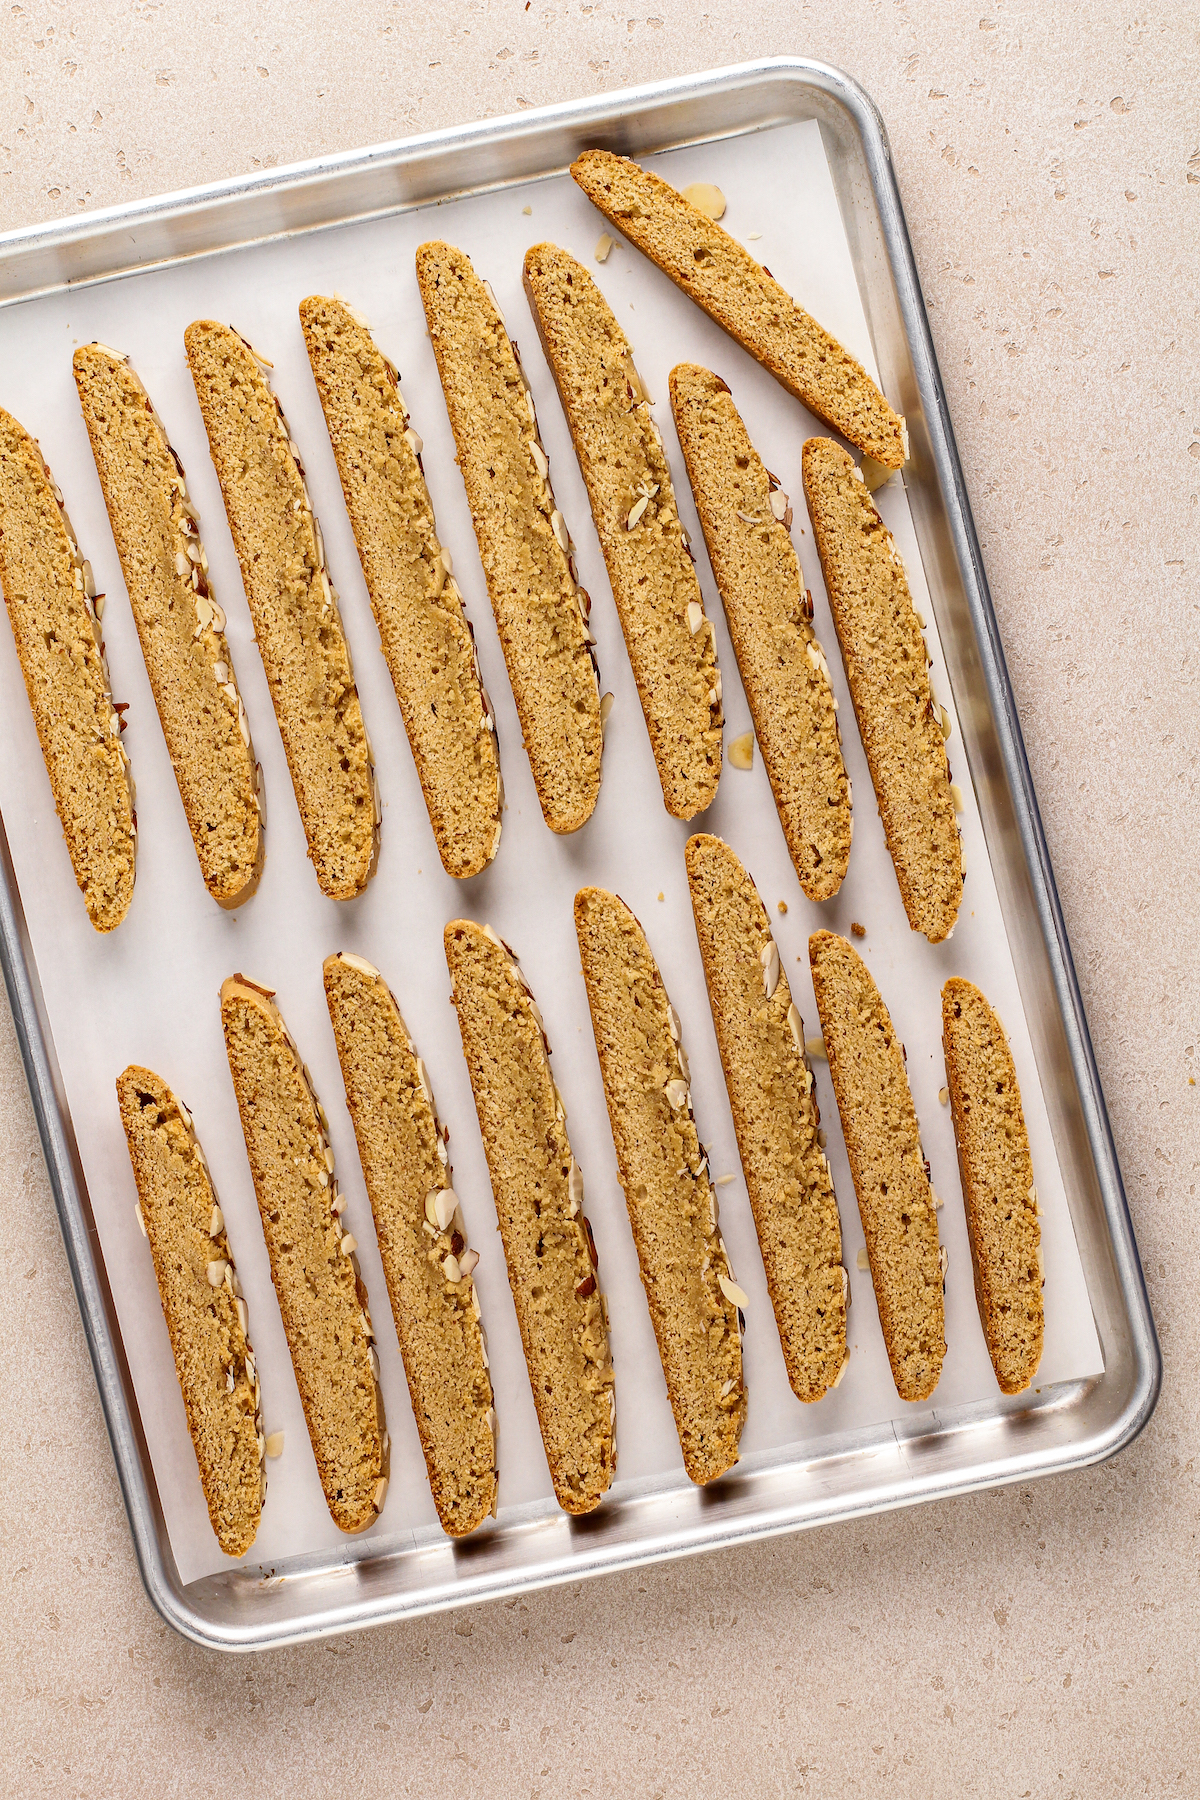 Slices of baked biscotti dough lined up on a baking sheet.